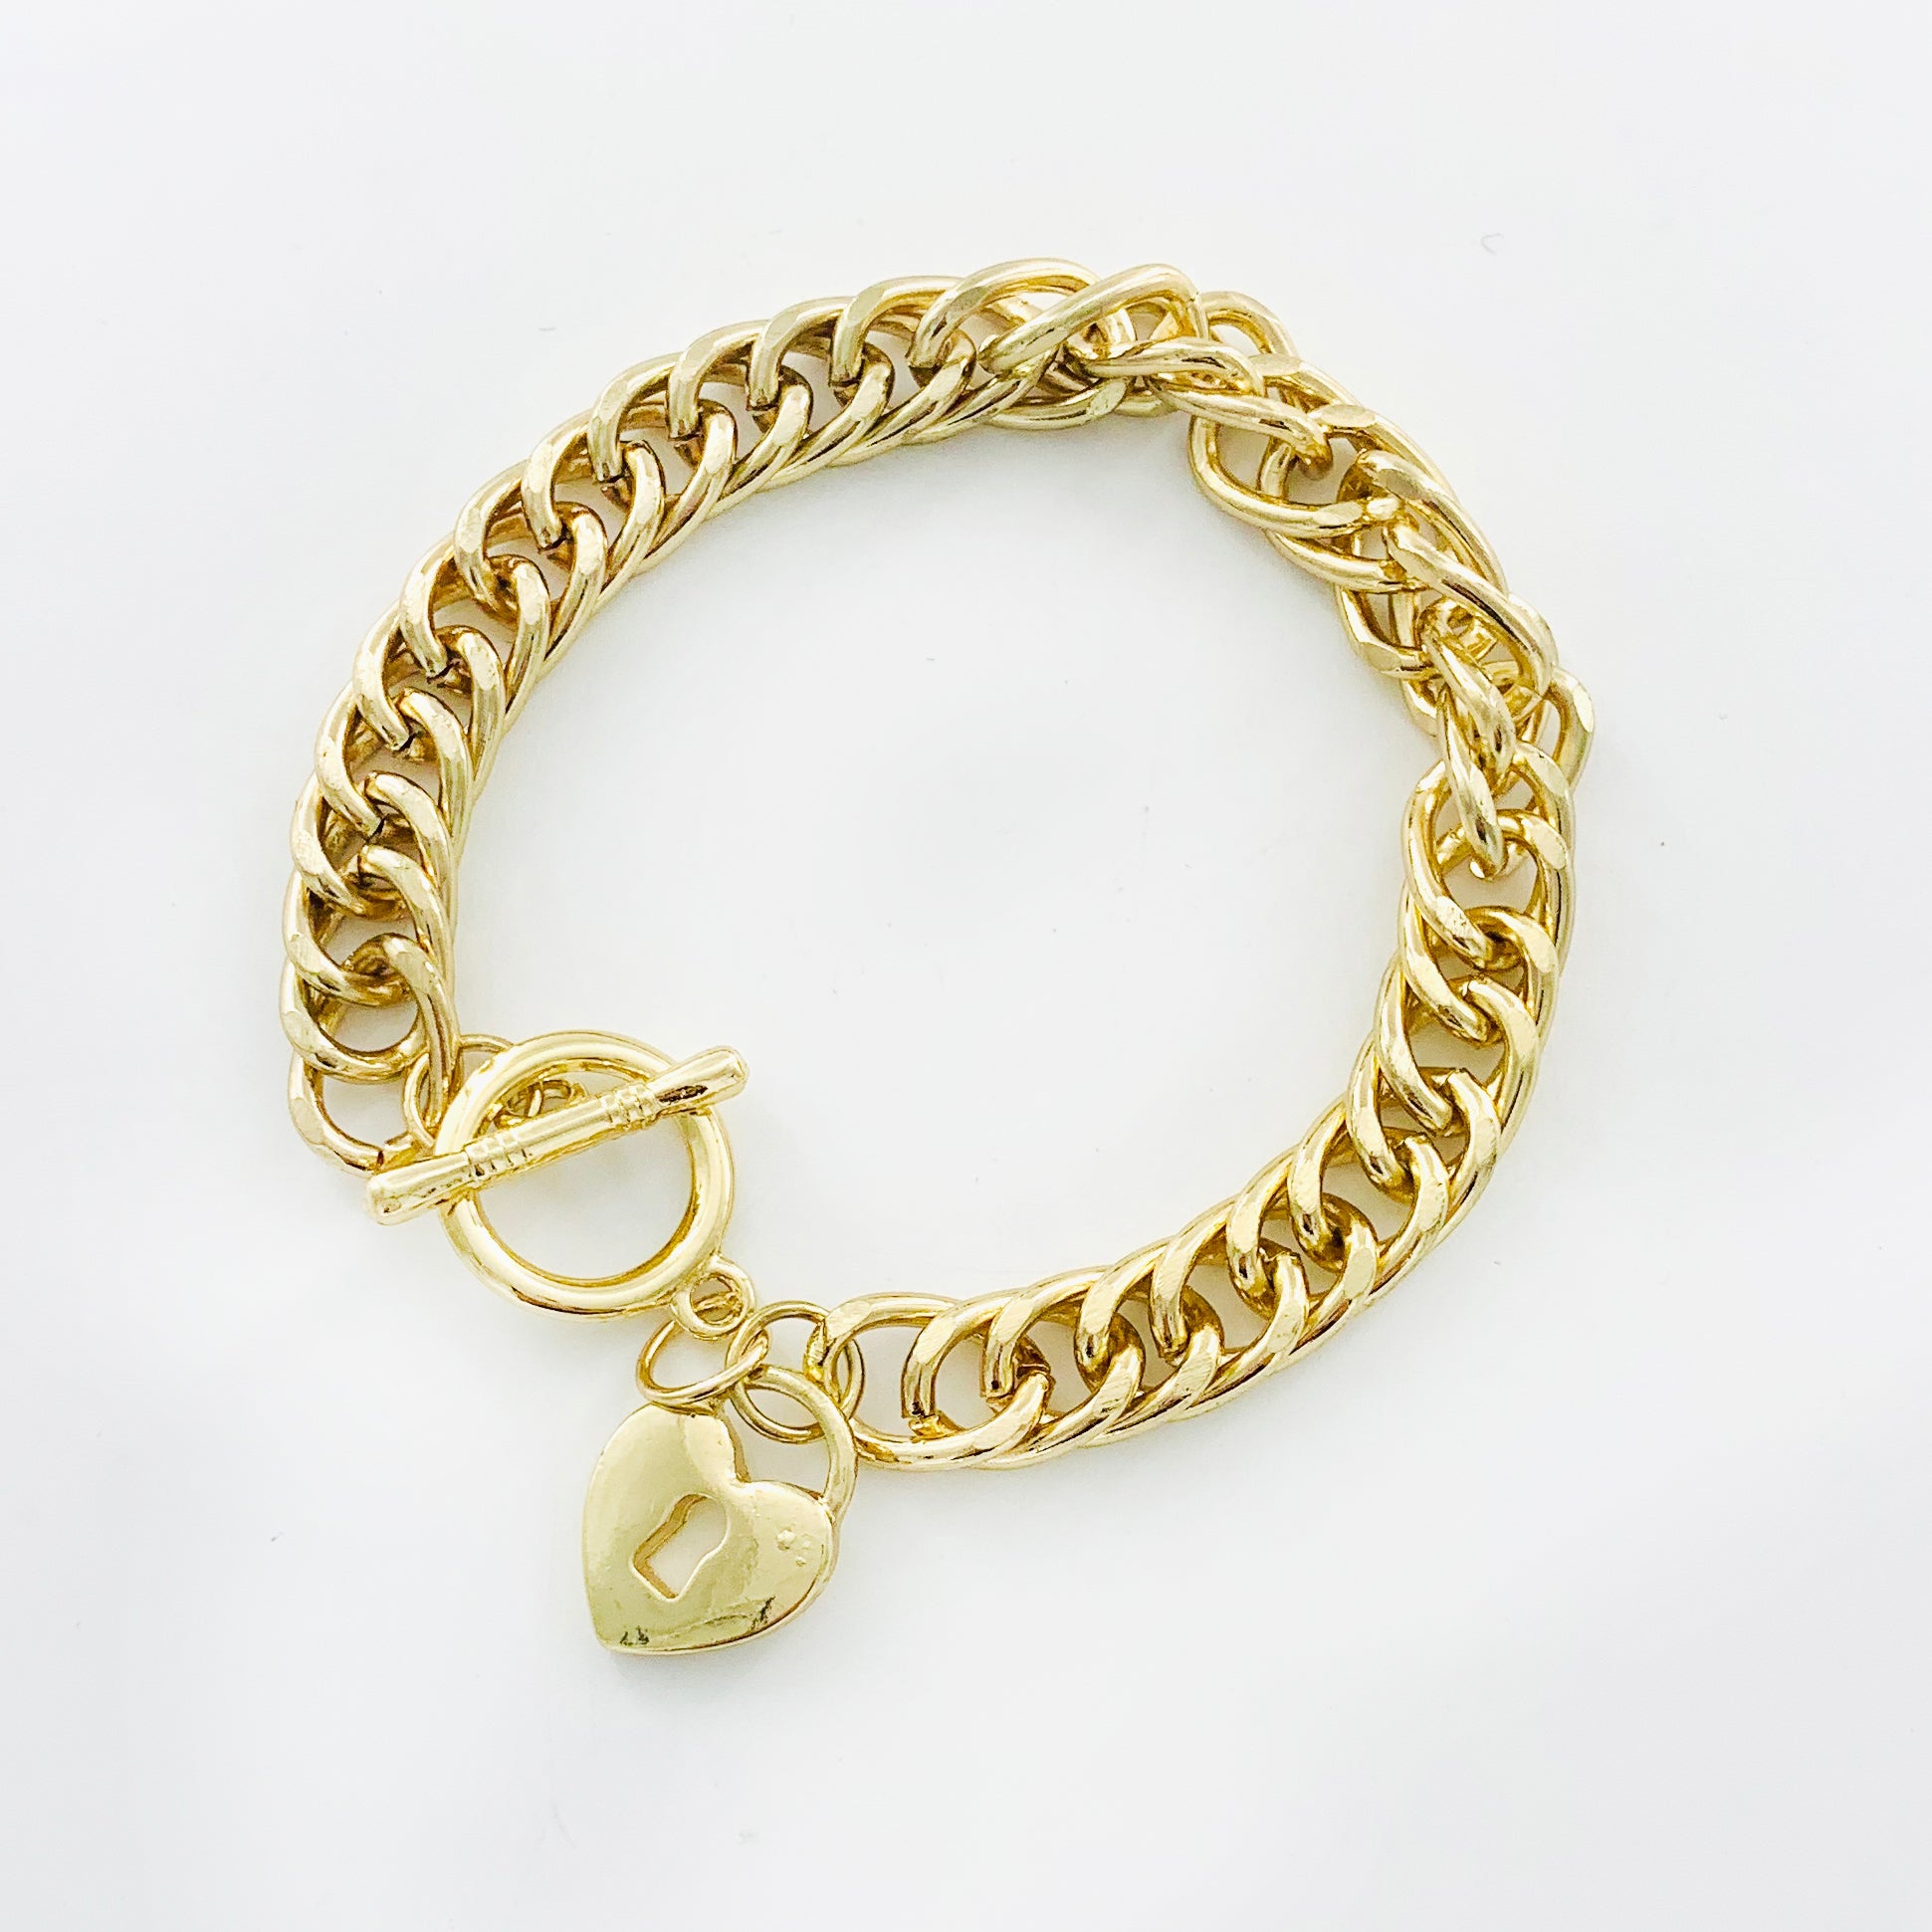 Chunky gold chain with gold heart charm